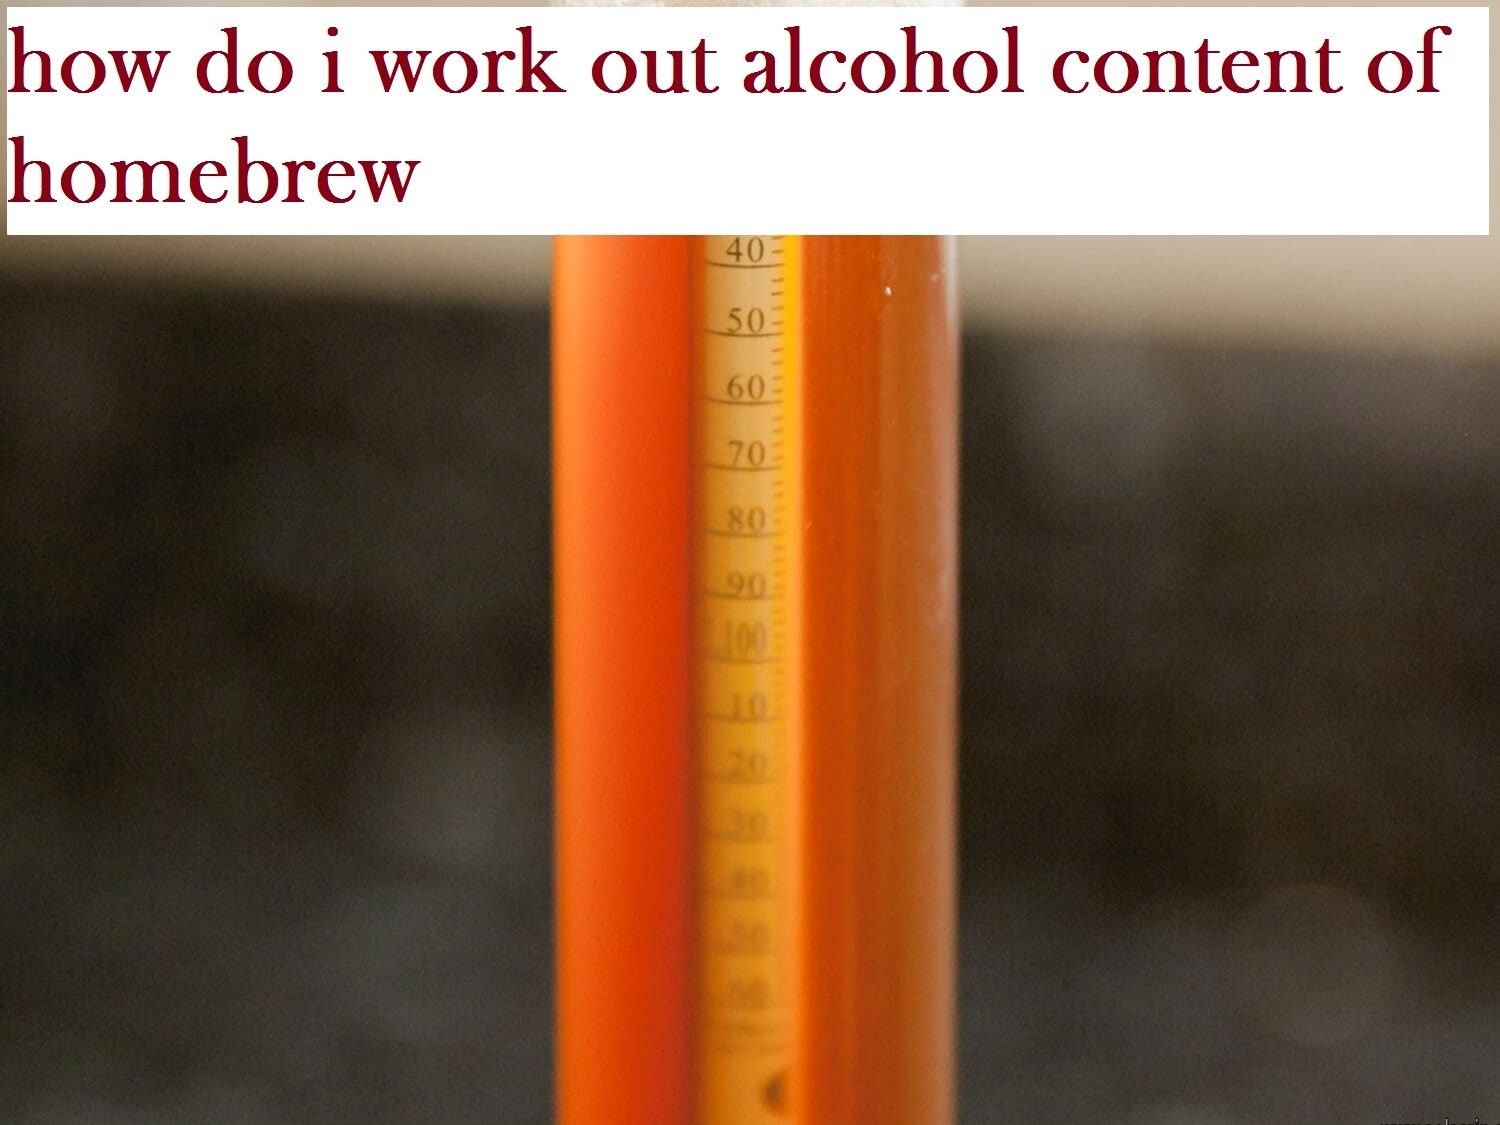 how do i work out alcohol content of homebrew